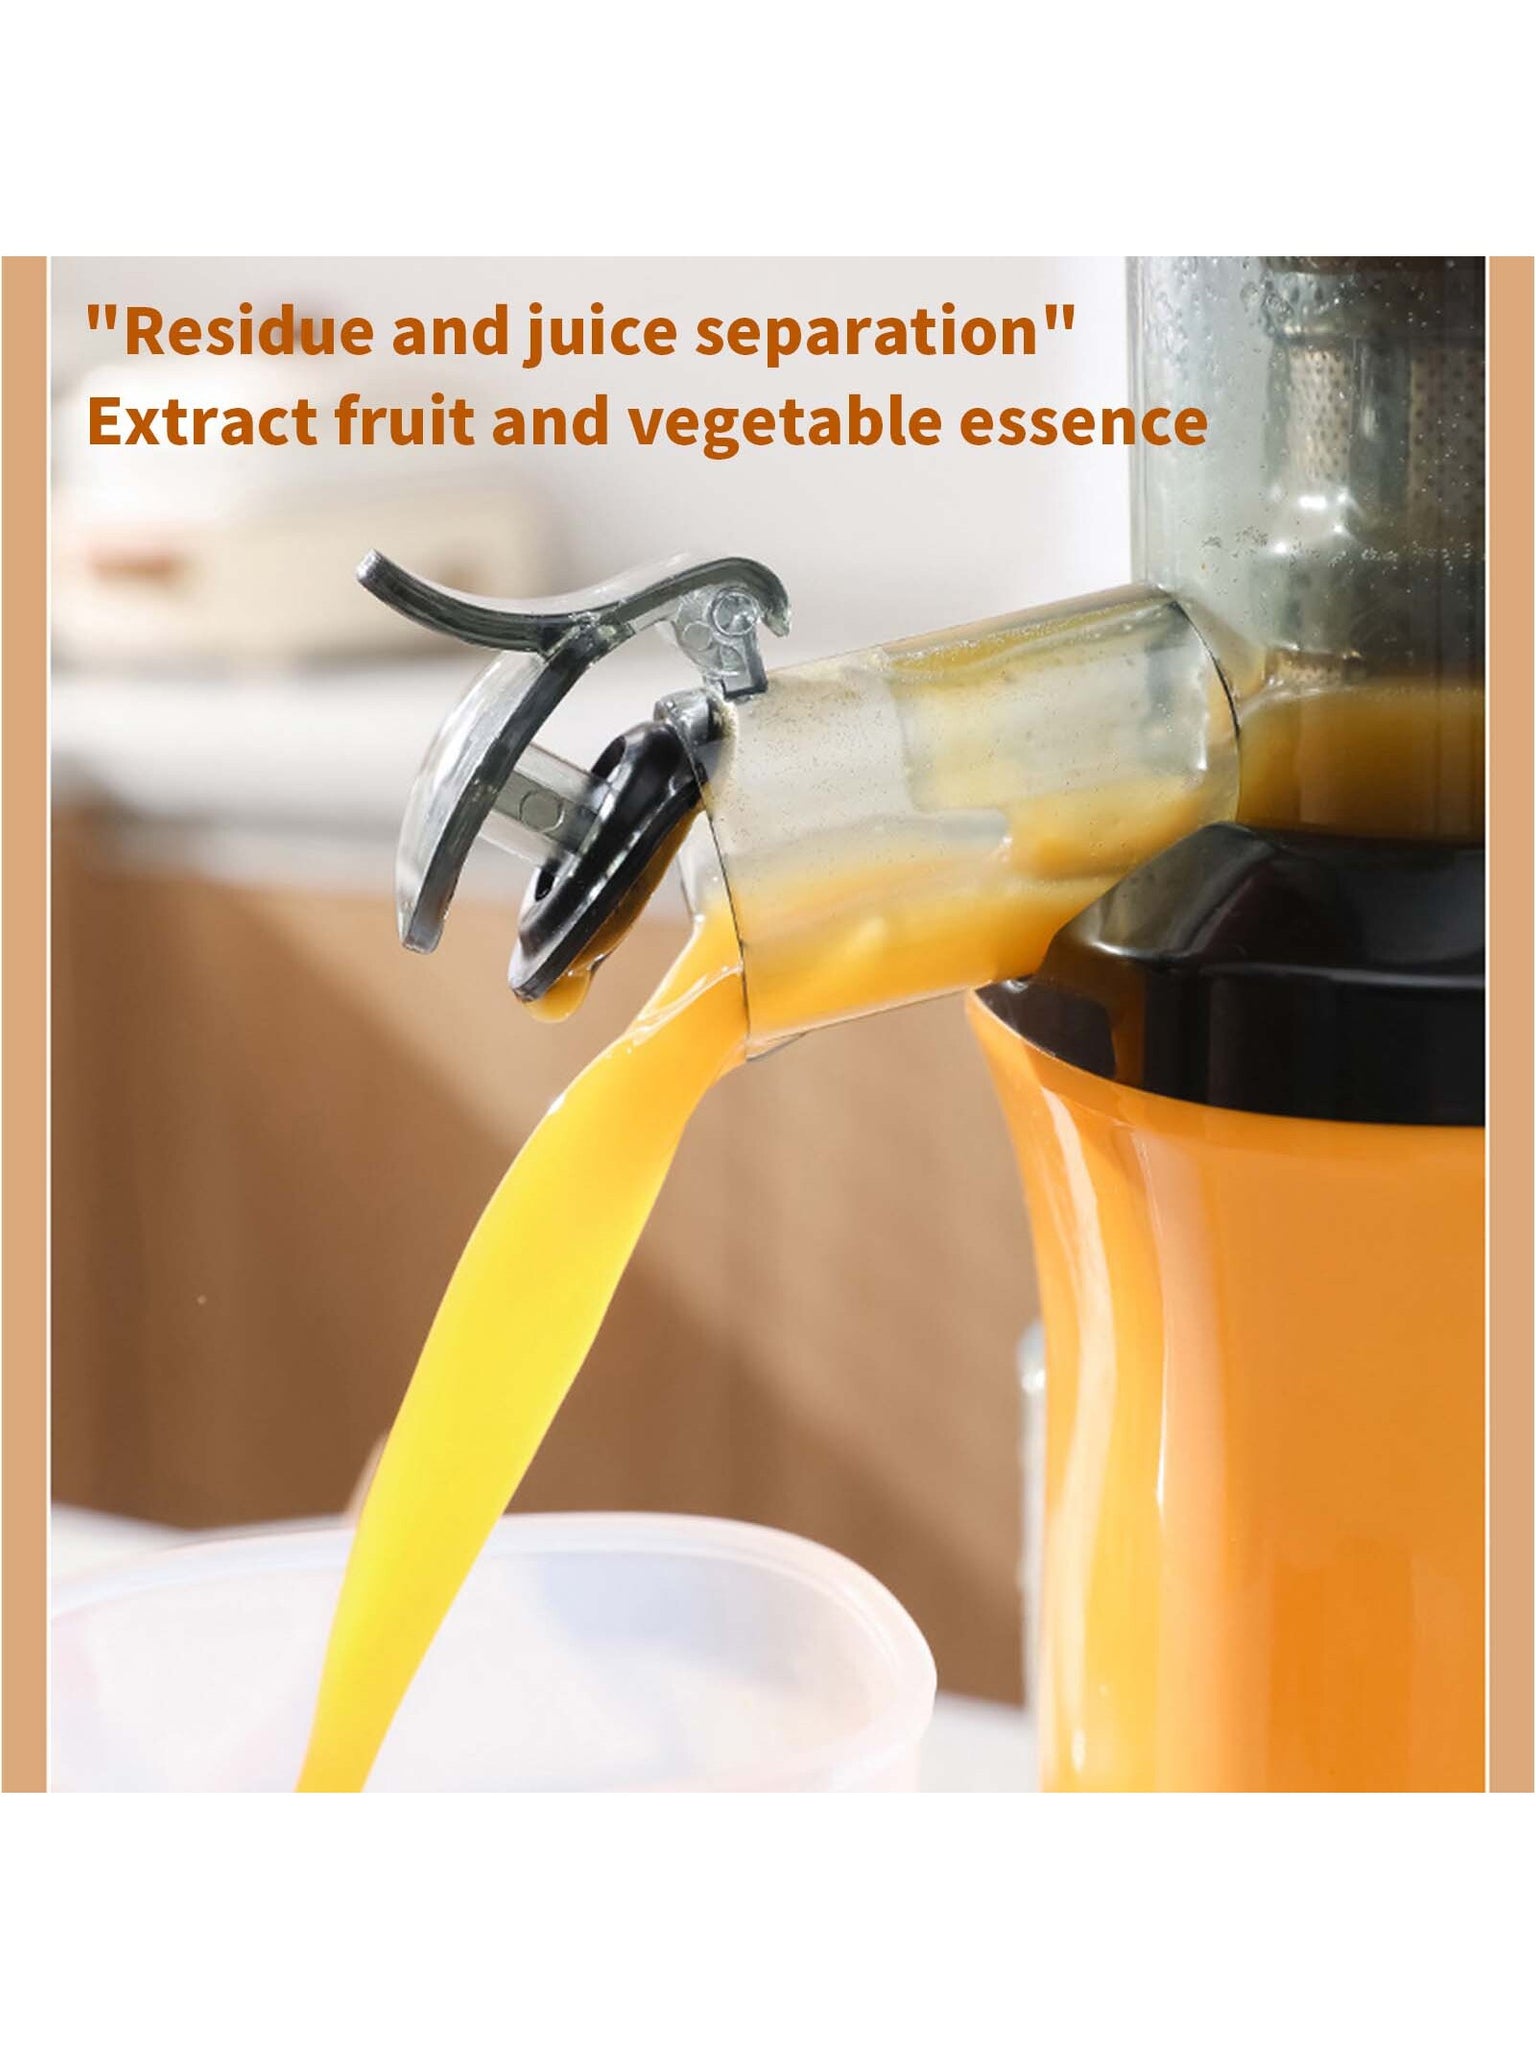 Household Fully Automatic Juice Extractor With Separated Residue And Juice-Orange-5